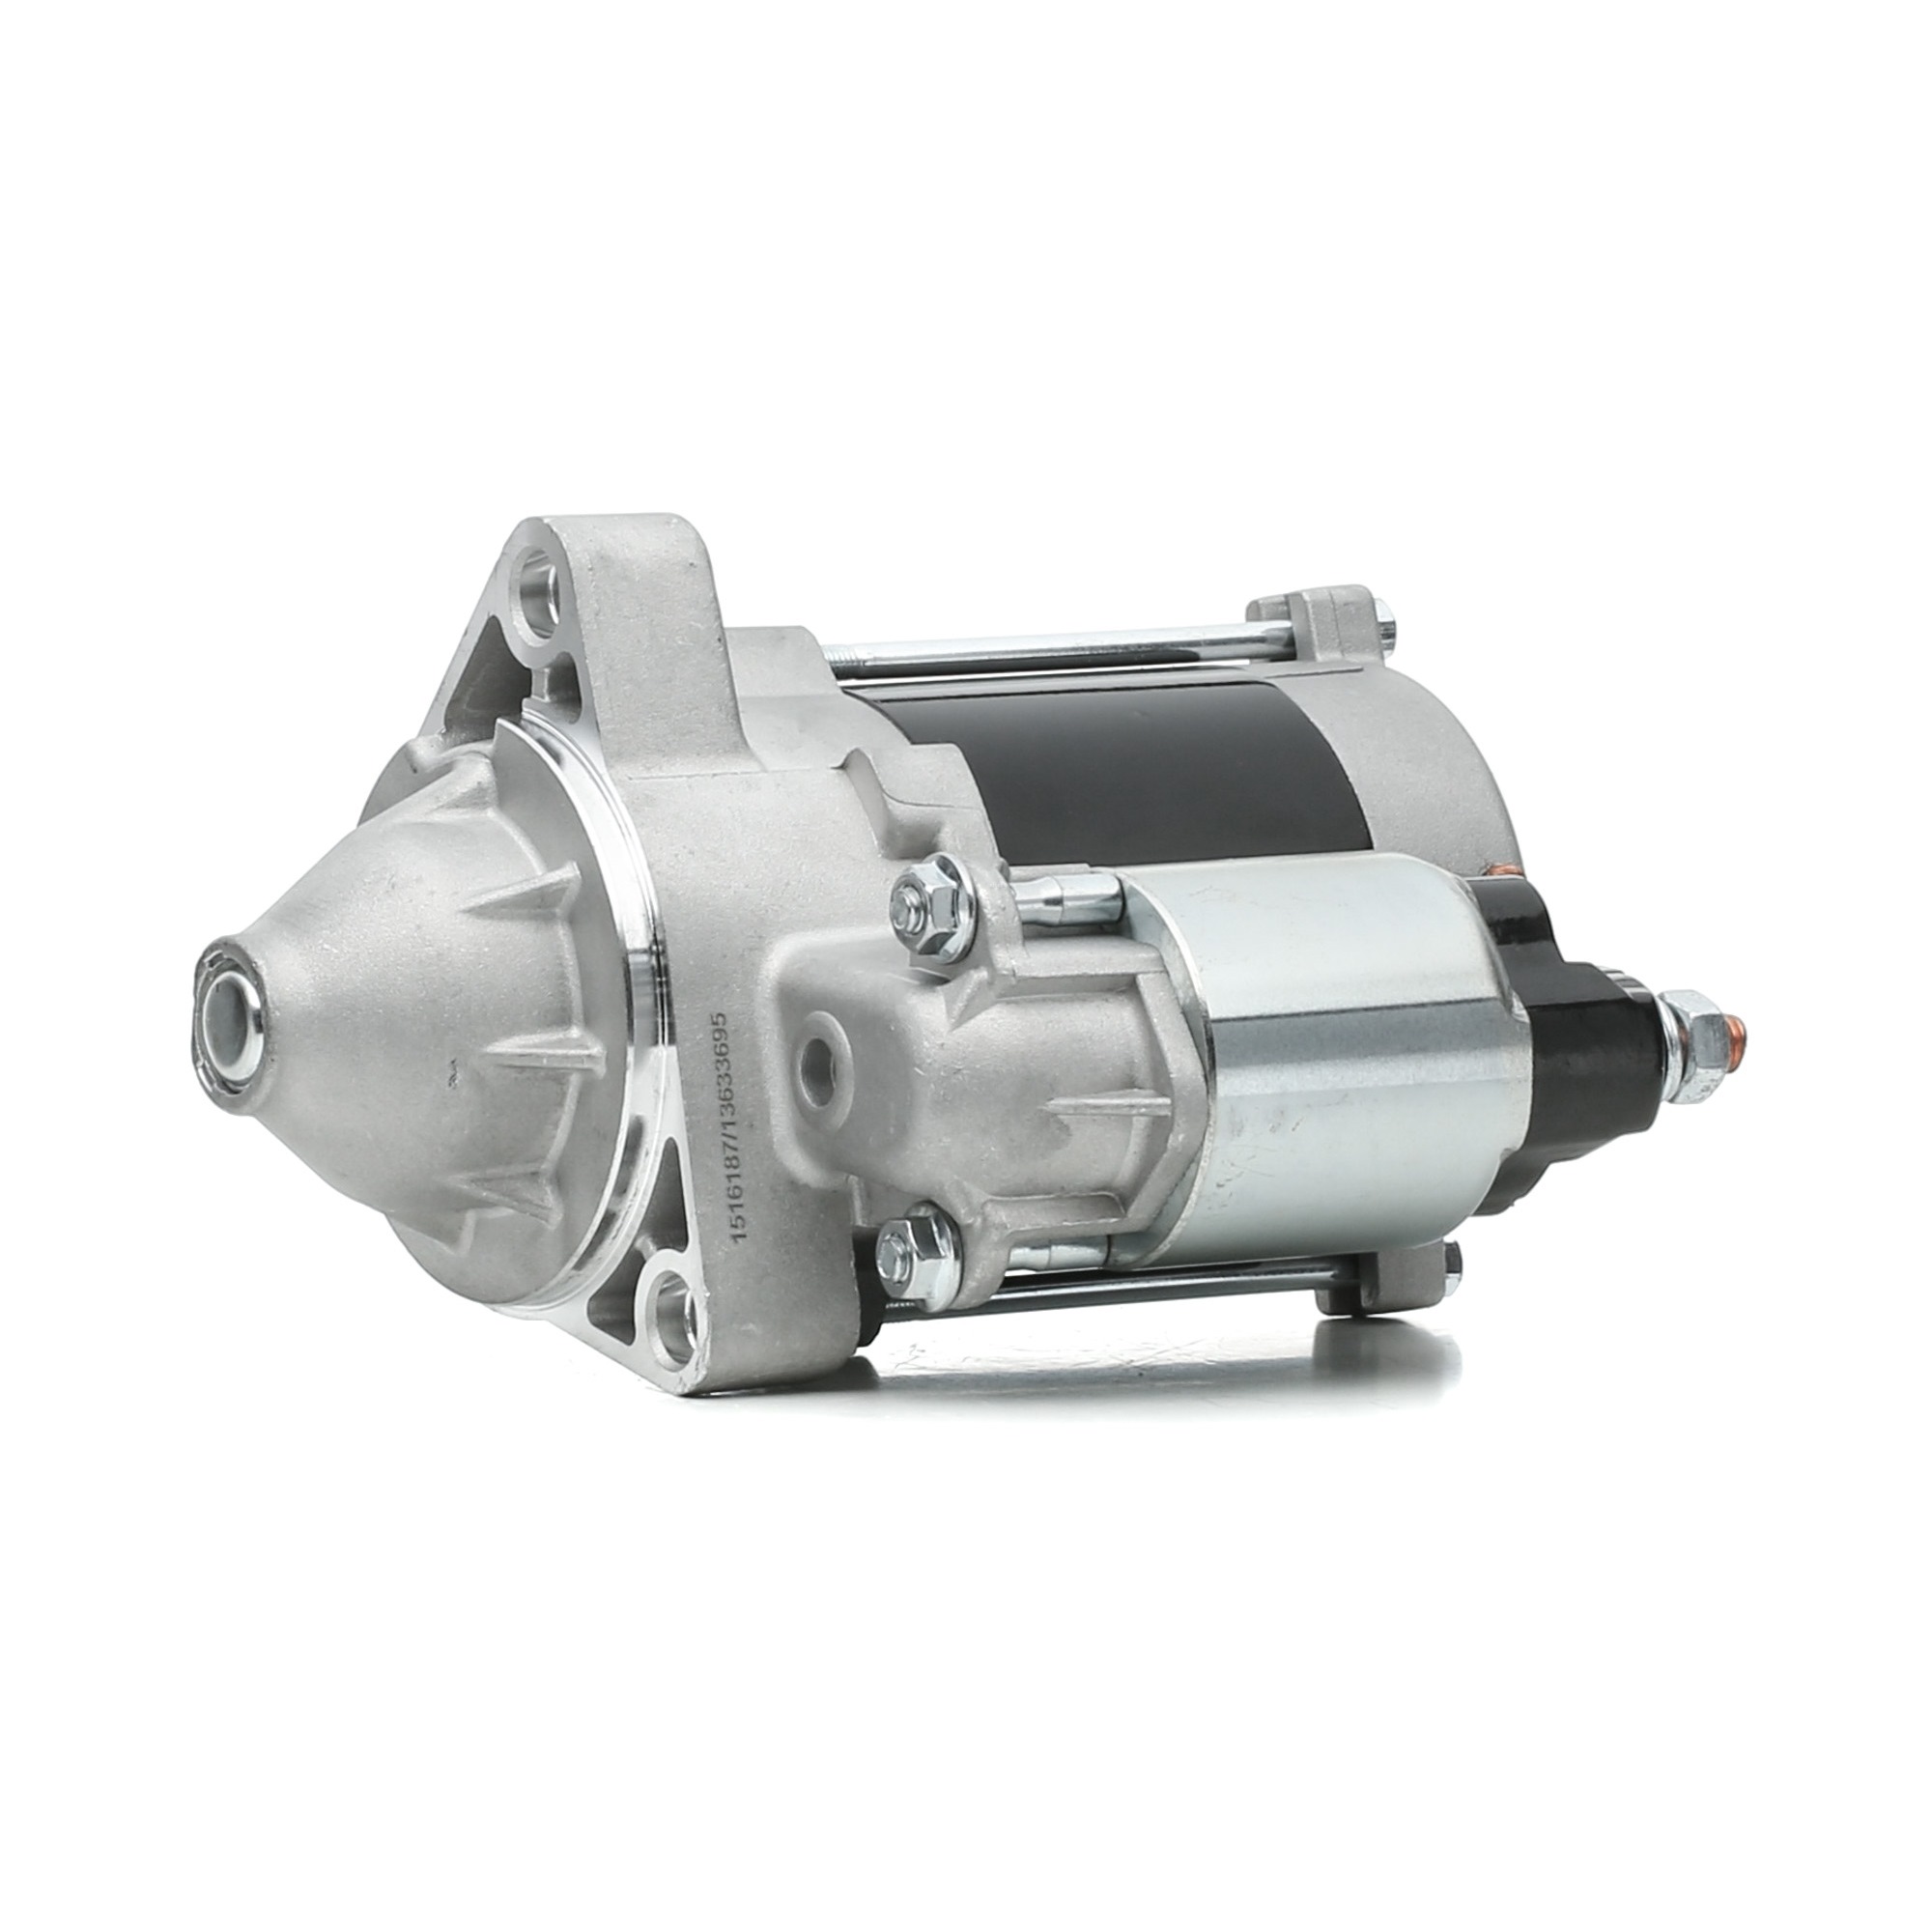 RIDEX 2S0253 Starter motor 12V, 1, 1,1kW, Number of Teeth: 8, with 50(Jet) clamp, 30 (M8), M8 B+, Ø 75 mm